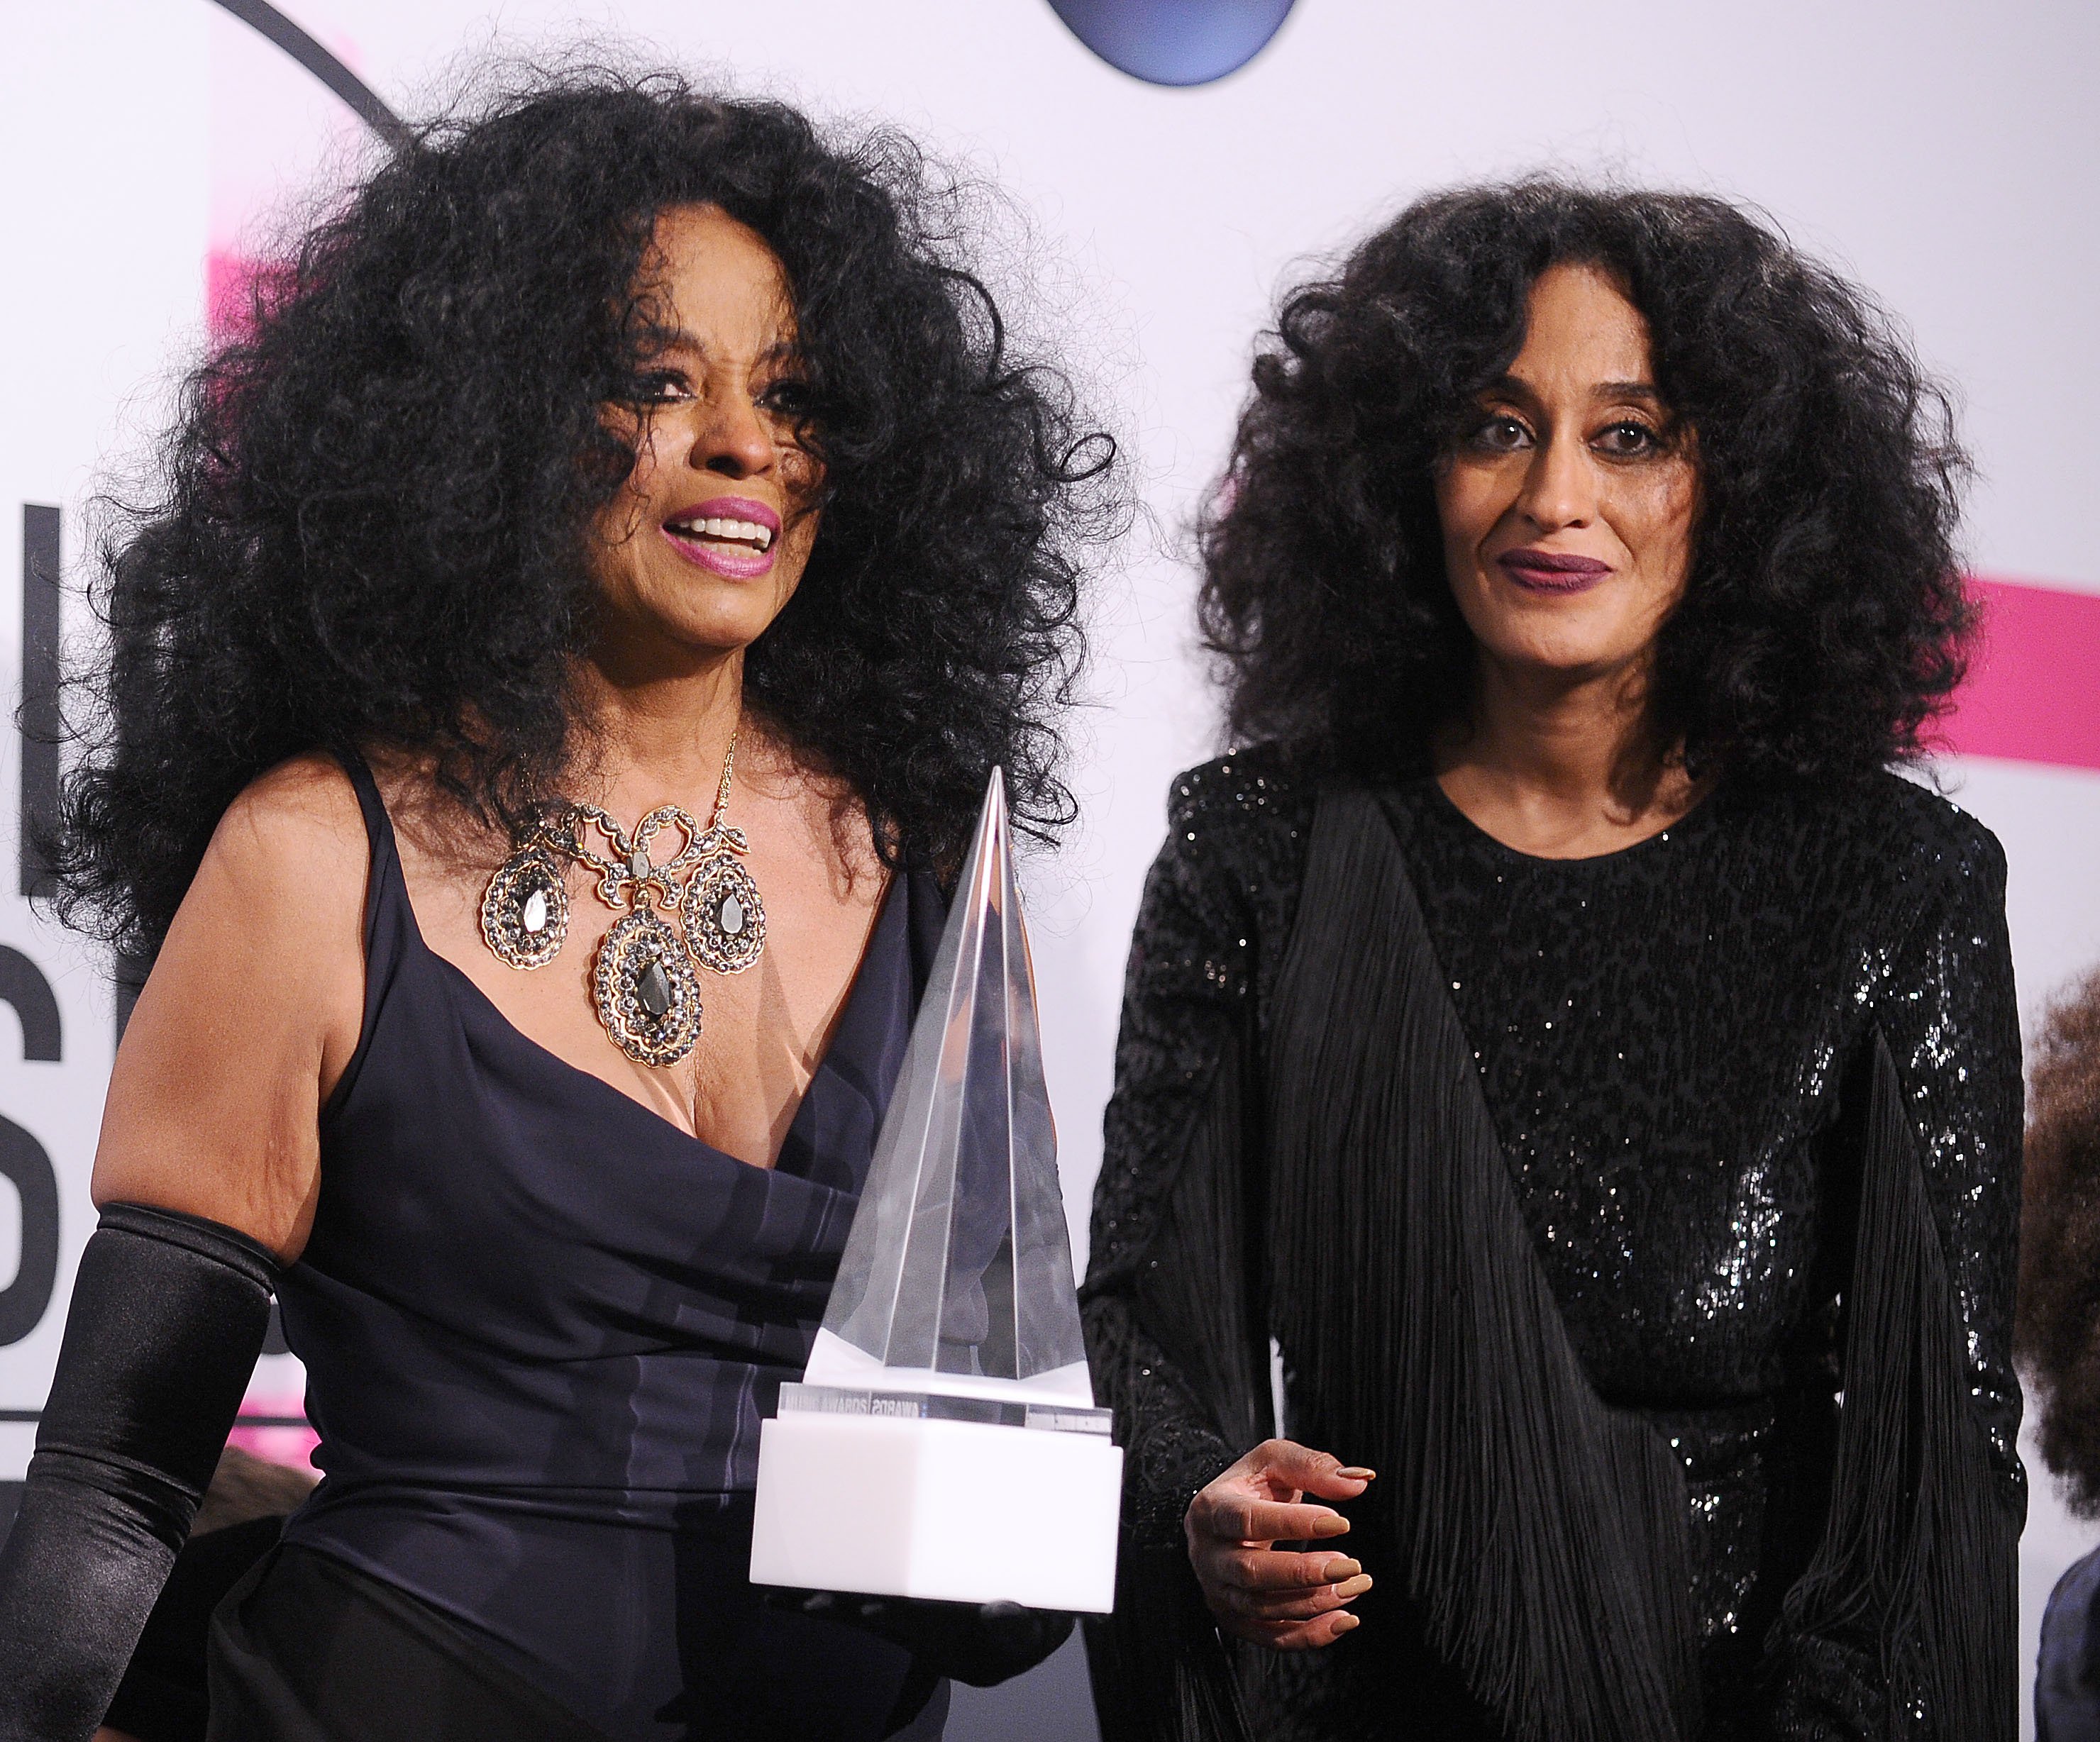 Diana Ross and Tracee Ellis Ross wearing all black while attending the American Music Awards.